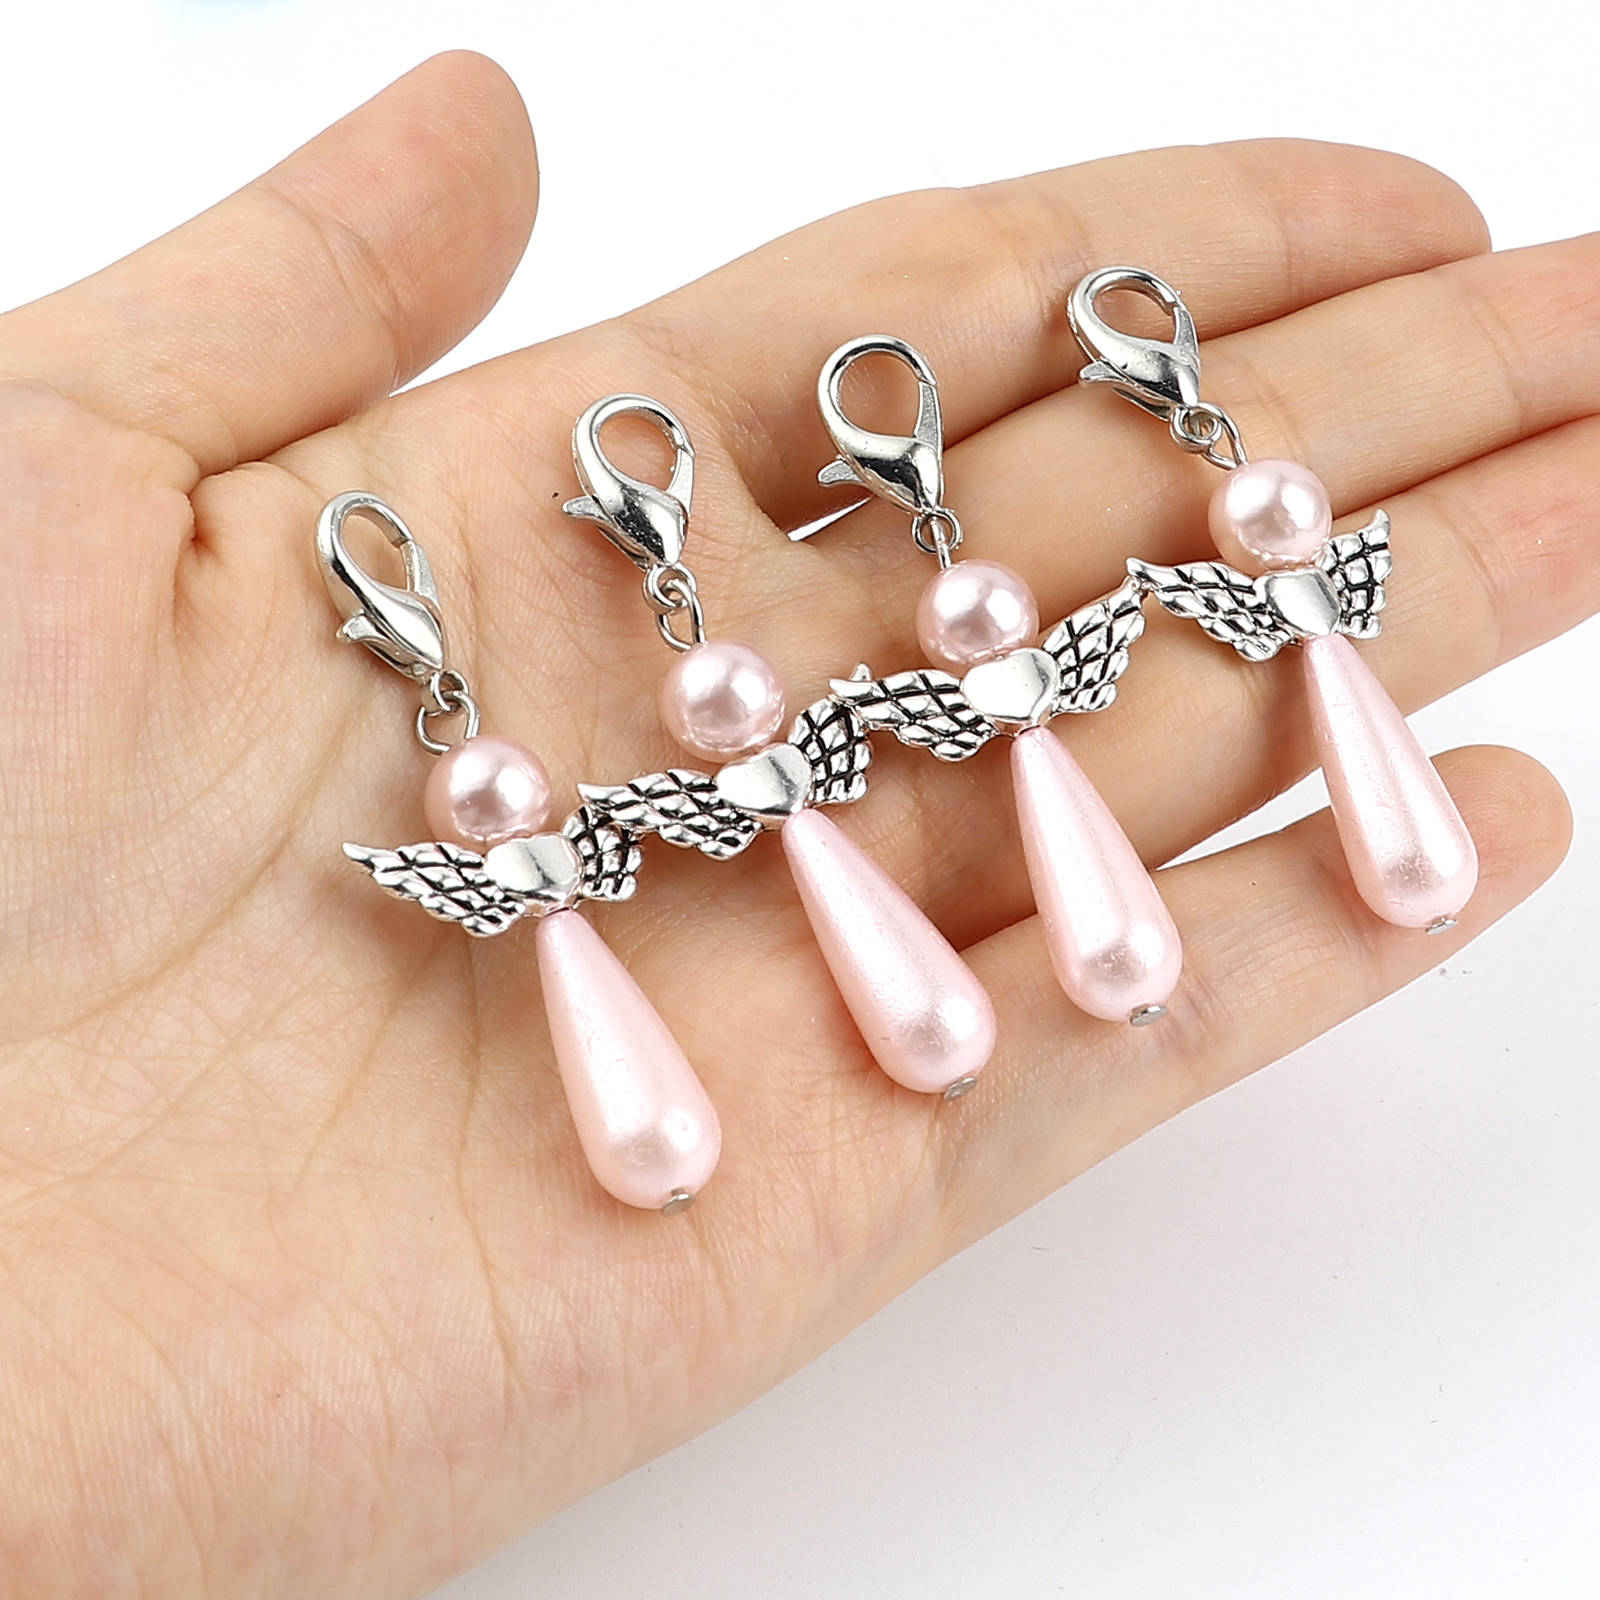 Picture of Zinc Based Alloy Knitting Stitch Markers Angel Antique Silver Color Light Pink 38mm x 22mm, 5 PCs